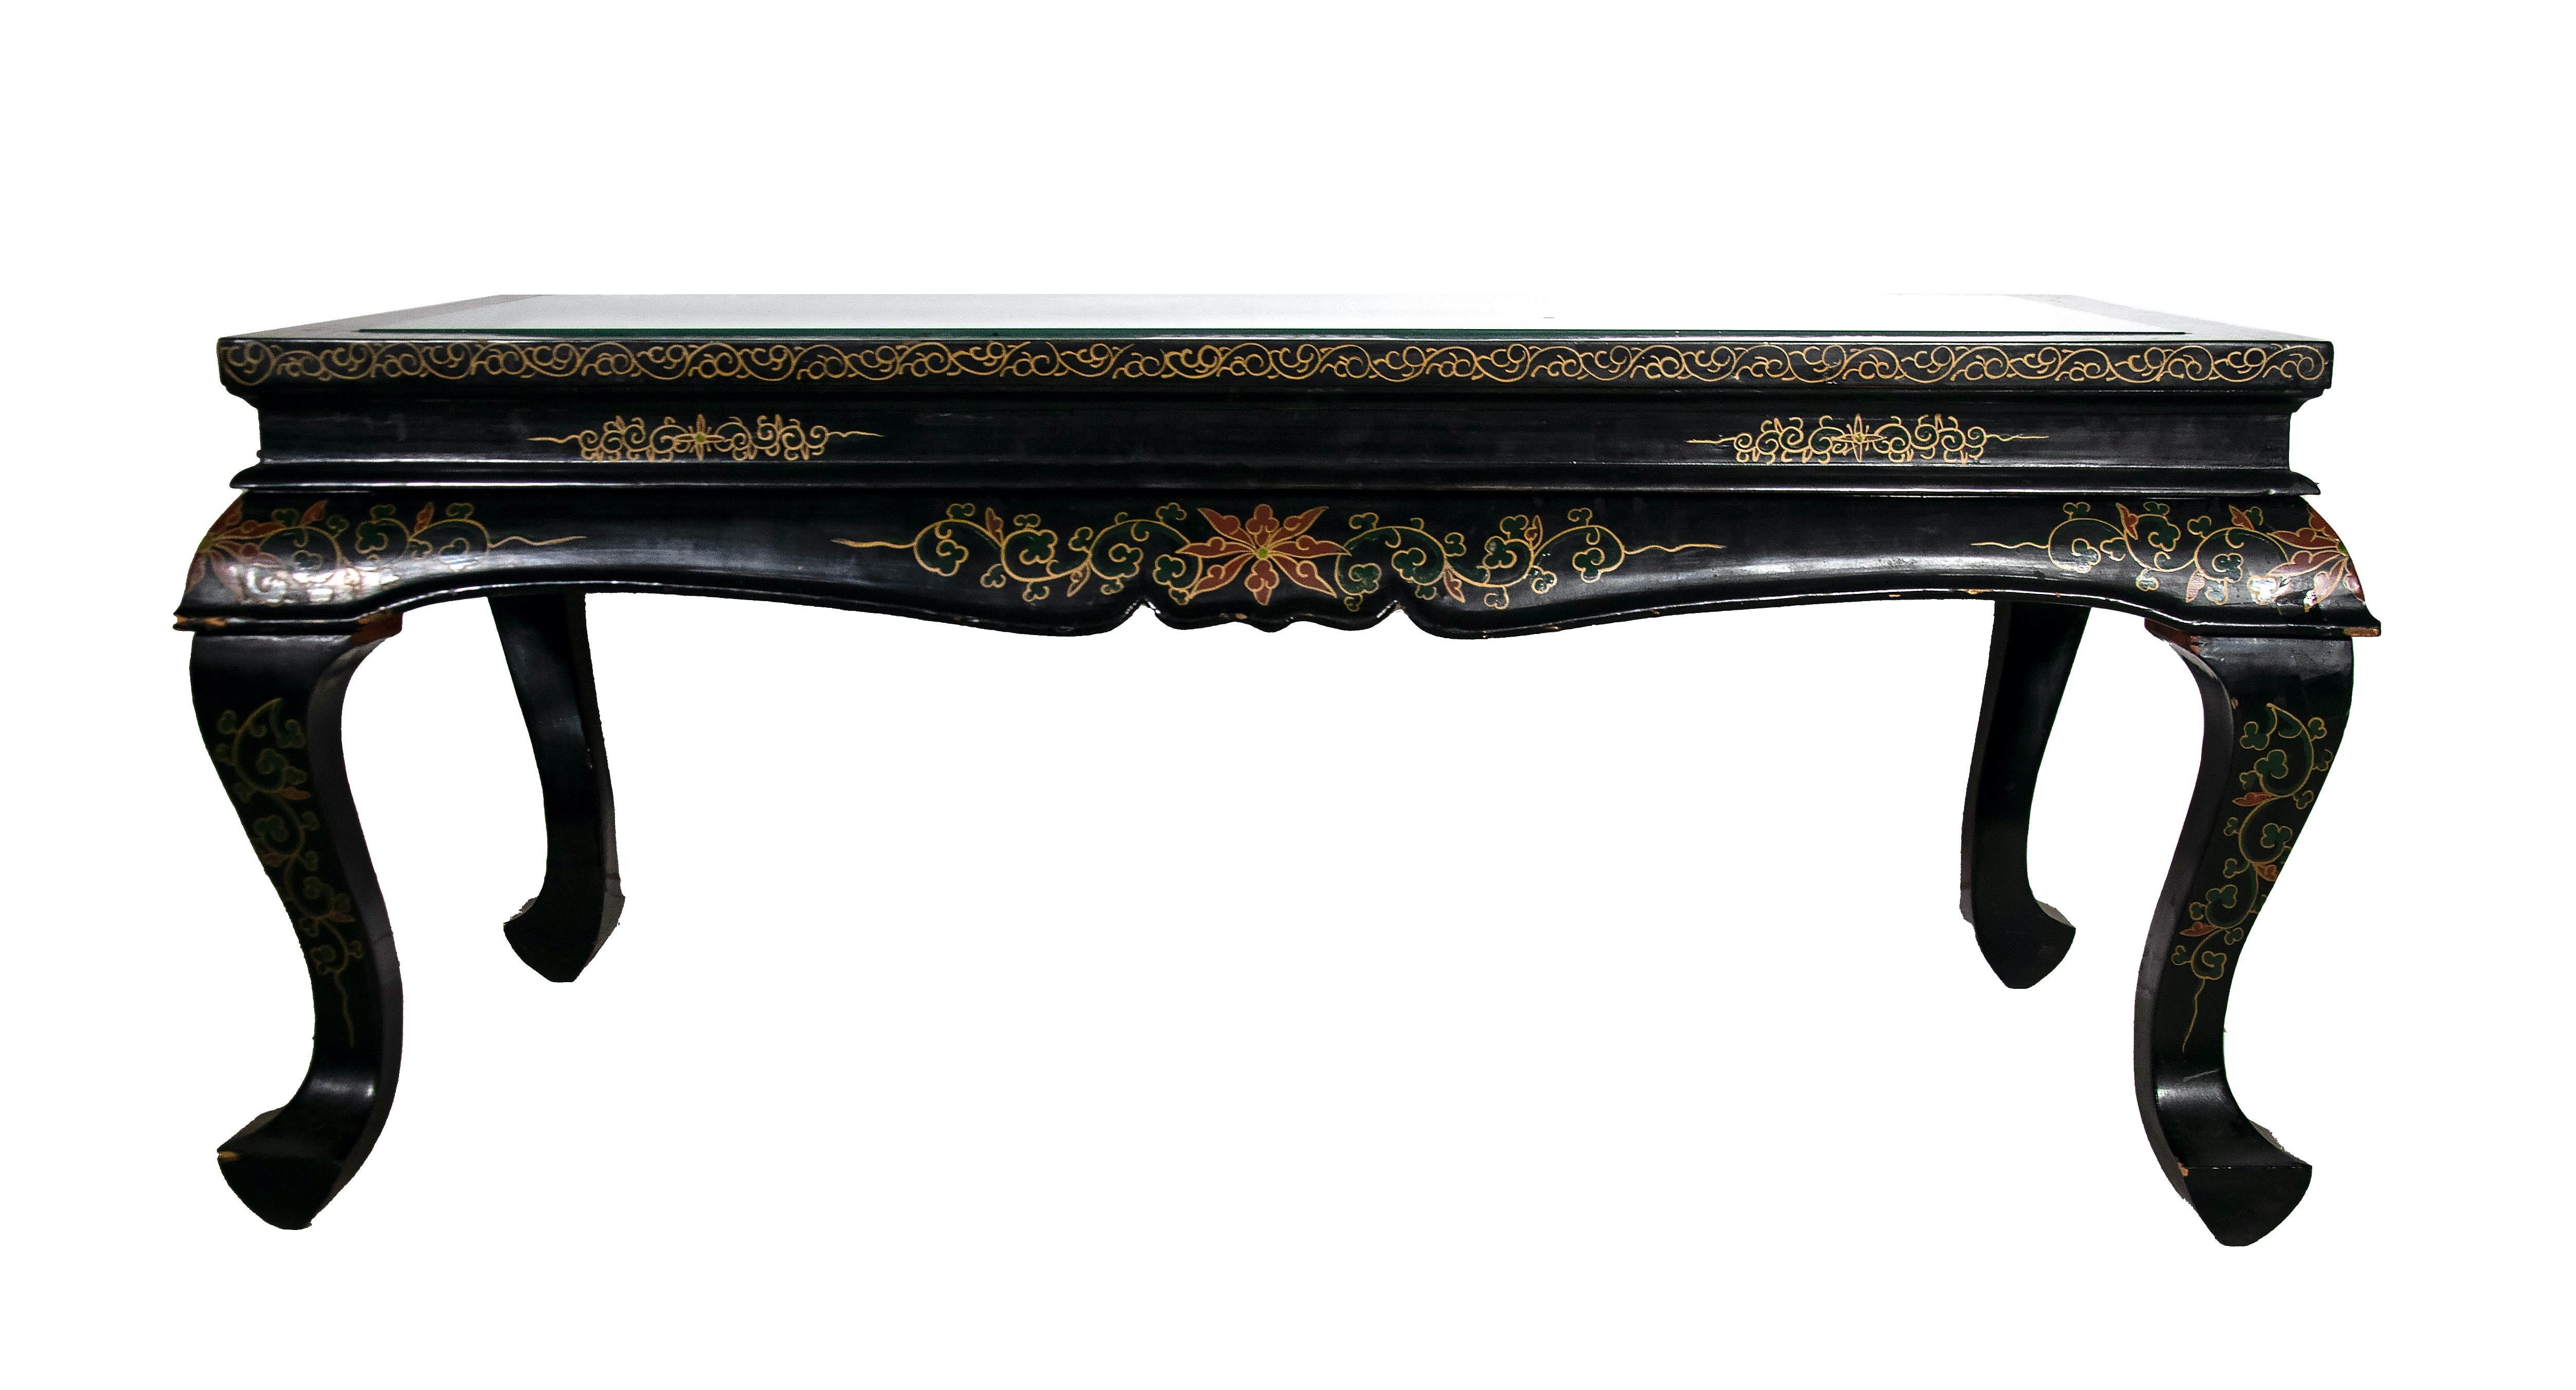 This Chinese coffee table is a precious table realized in the early to mid-20th century.

The table is on curved legs, black lacquered ebany wood, floral painted and decorated with mother of pearl inlays, a relief image made of jade and other